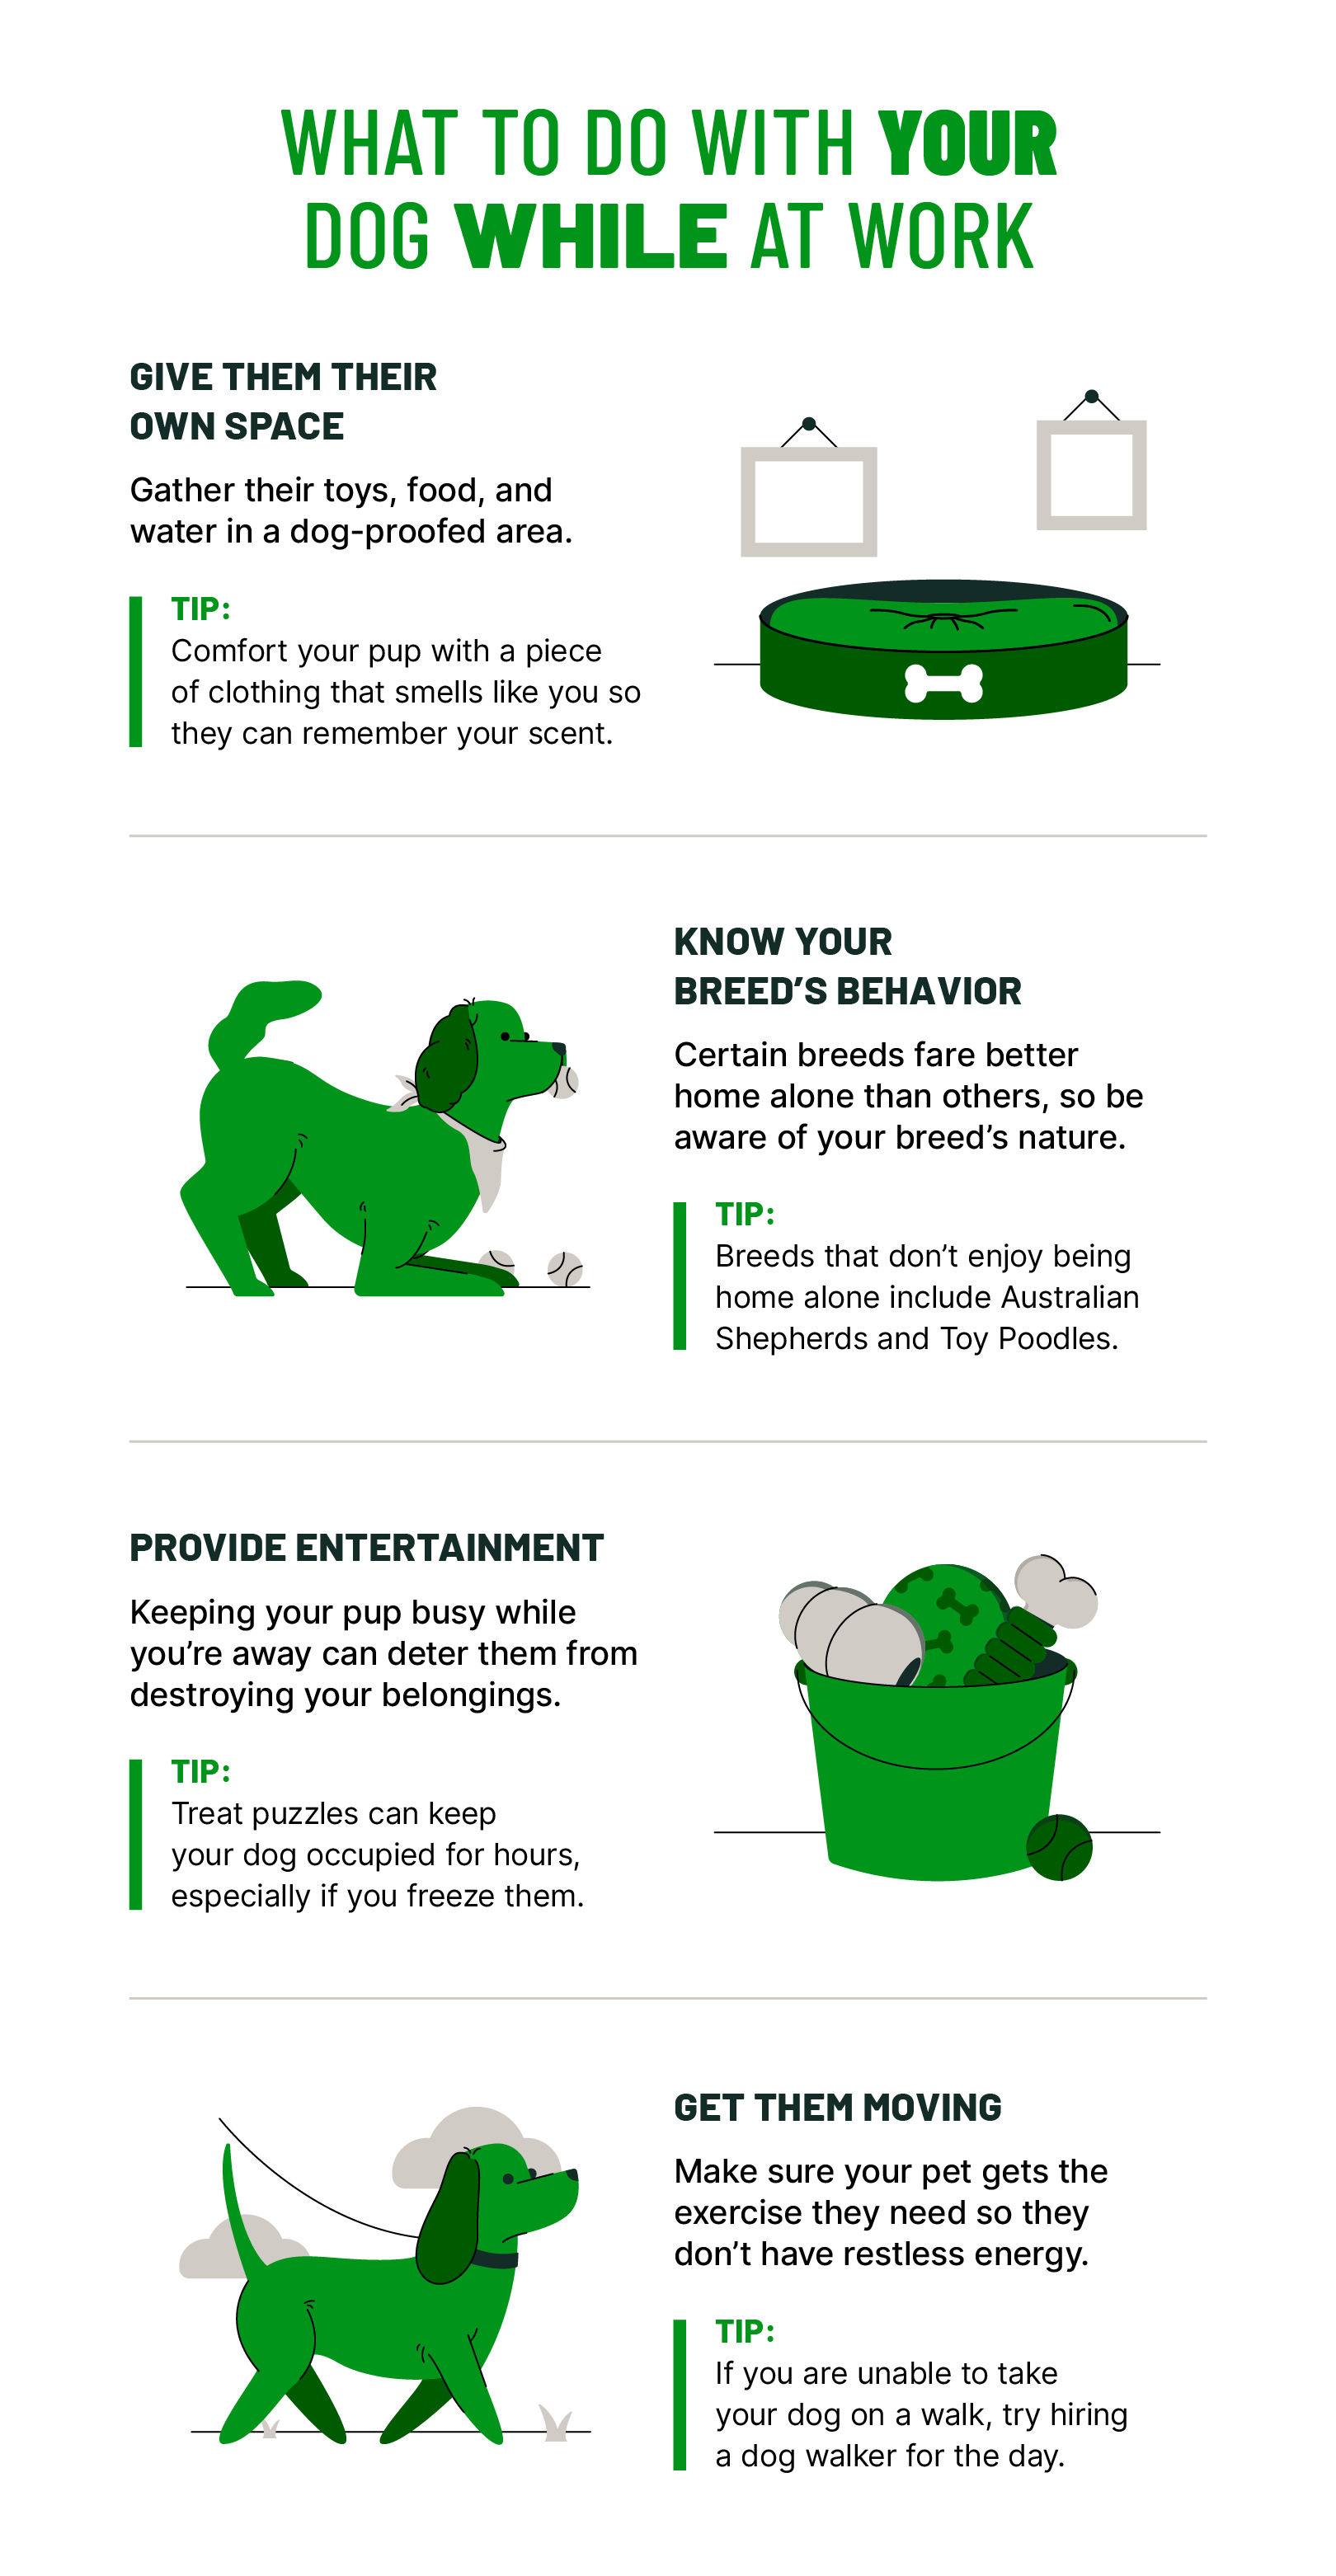 https://www.hippo.com/sites/default/files/content/paragraphs/inline/what-to-do-with-your-dog-while-at-work.png